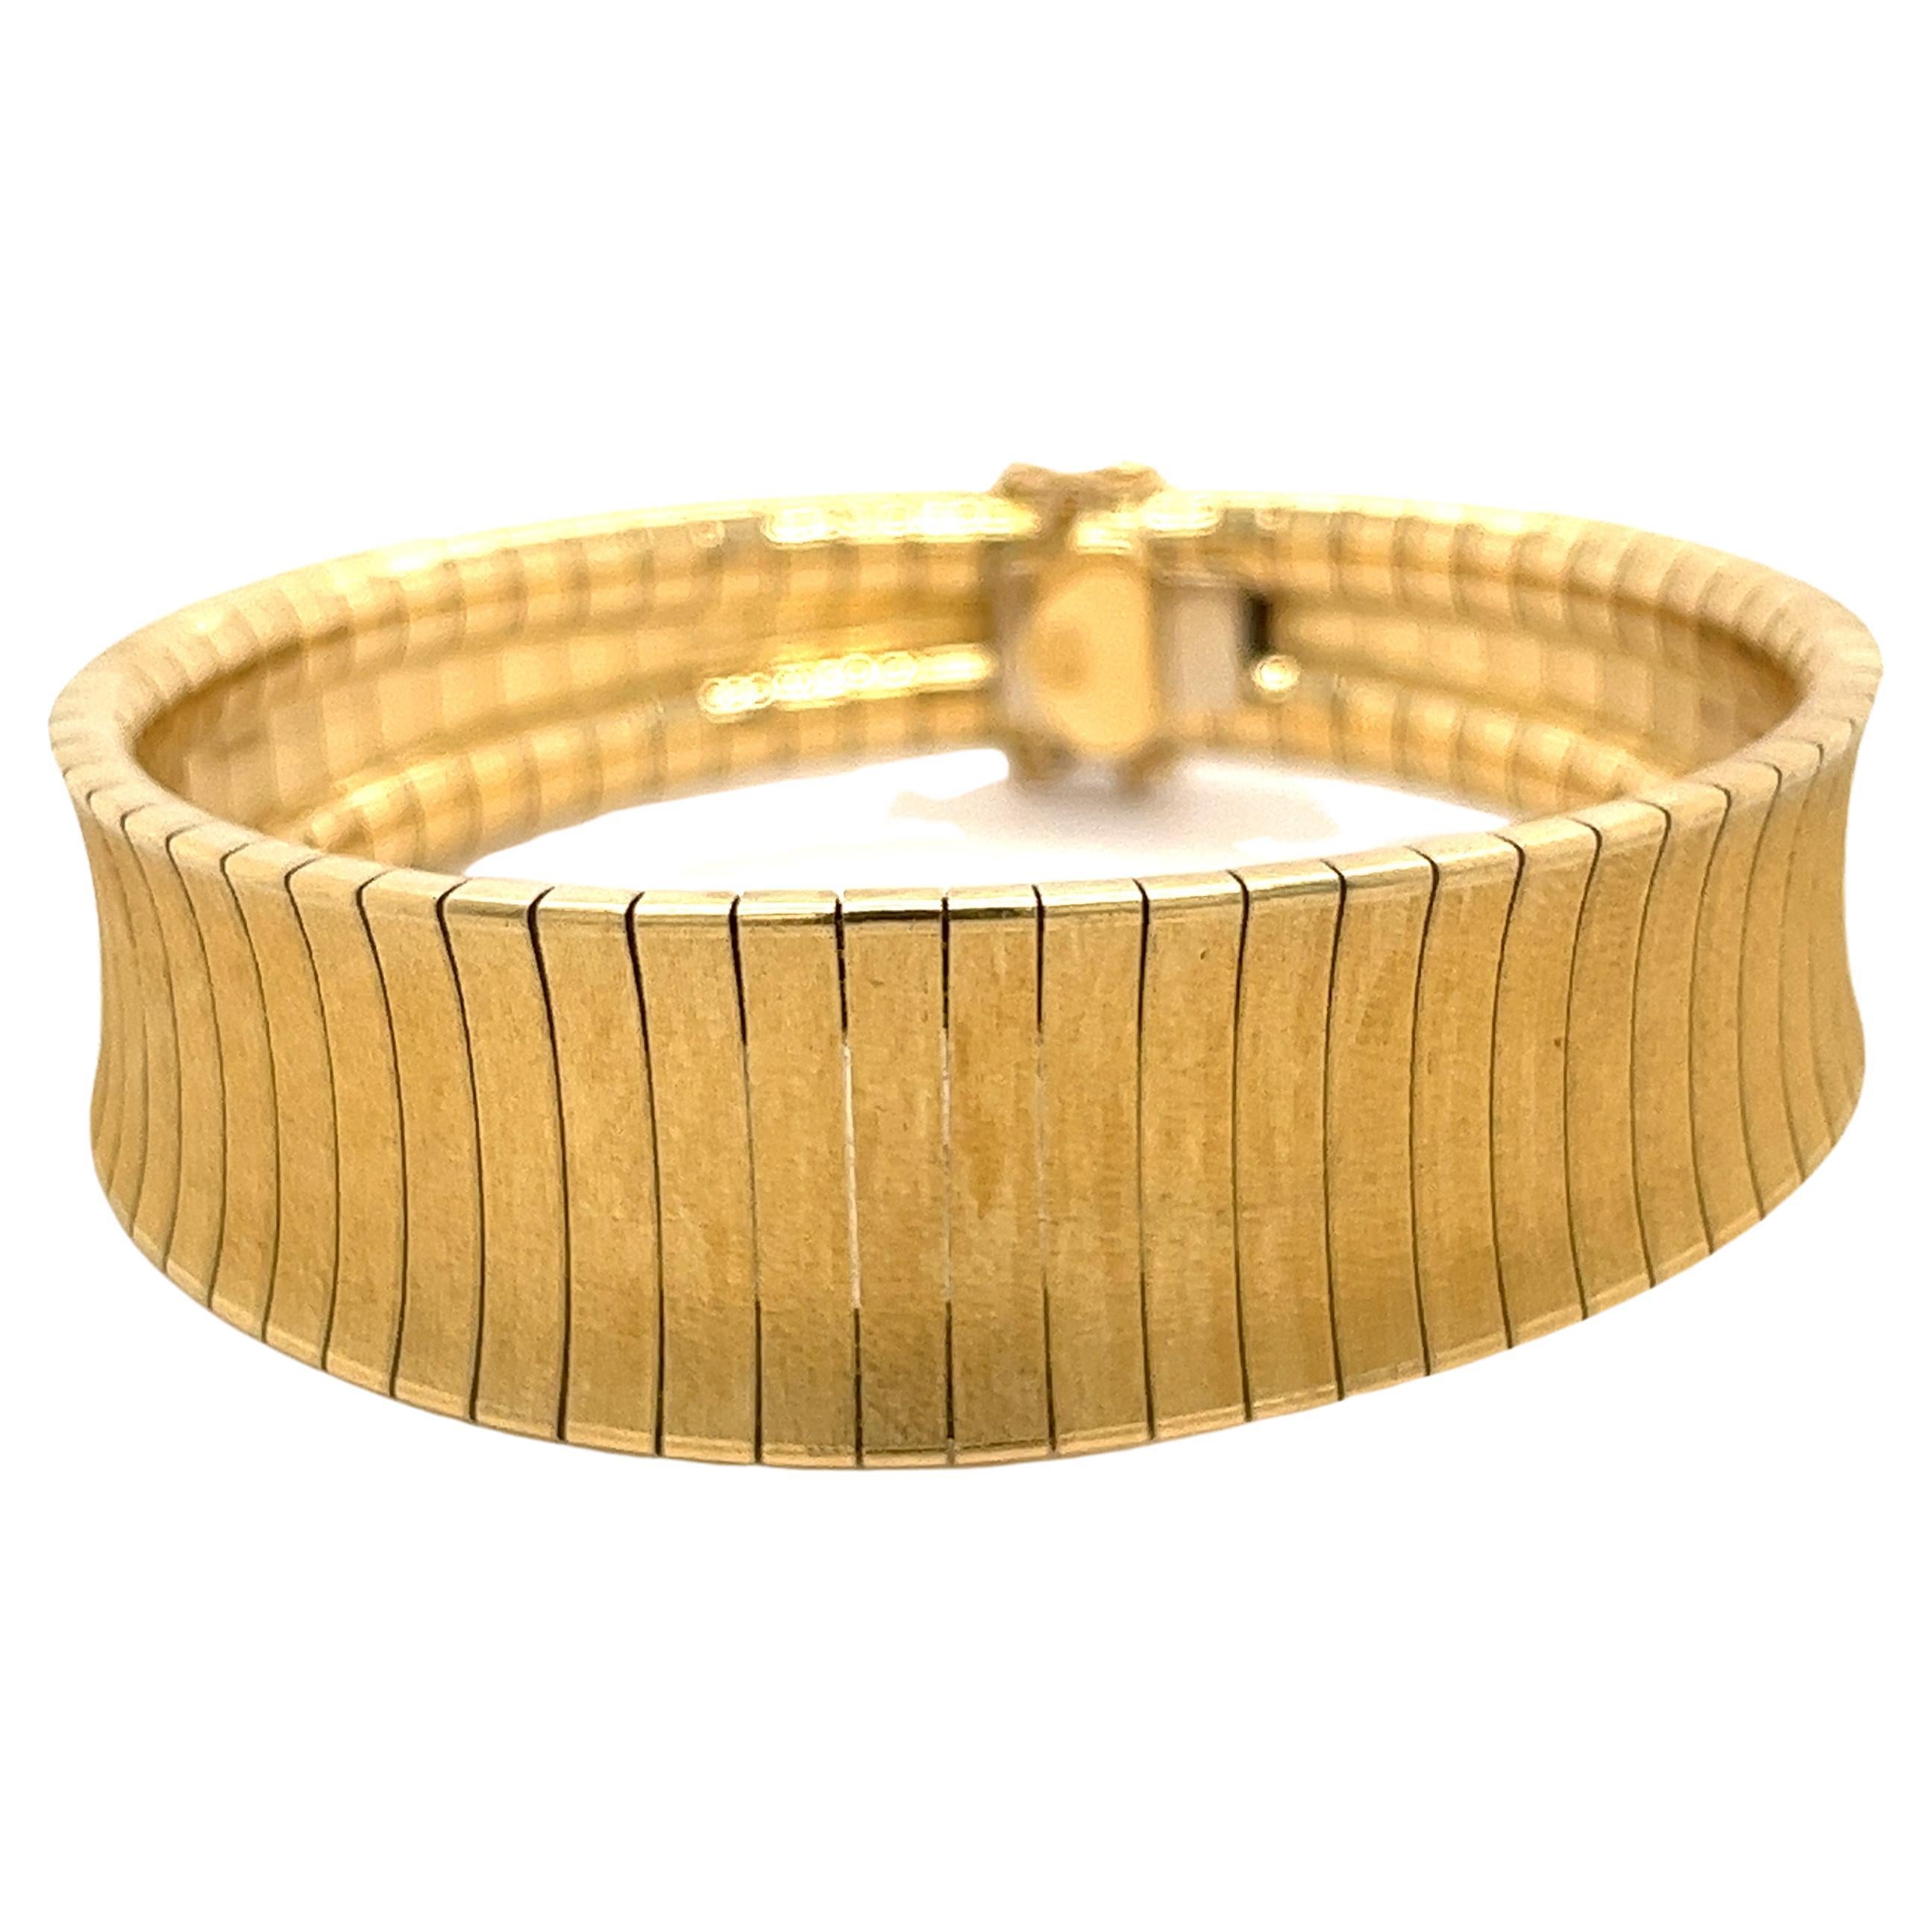 Flexible 18 karat yellow gold vintage bracelet with a textured matte finish. Secure box closure with a smooth back that glides gracefully on the wrist. This bracelet seamlessly wraps around the wrist for a super comfortable fit. Made to be worn